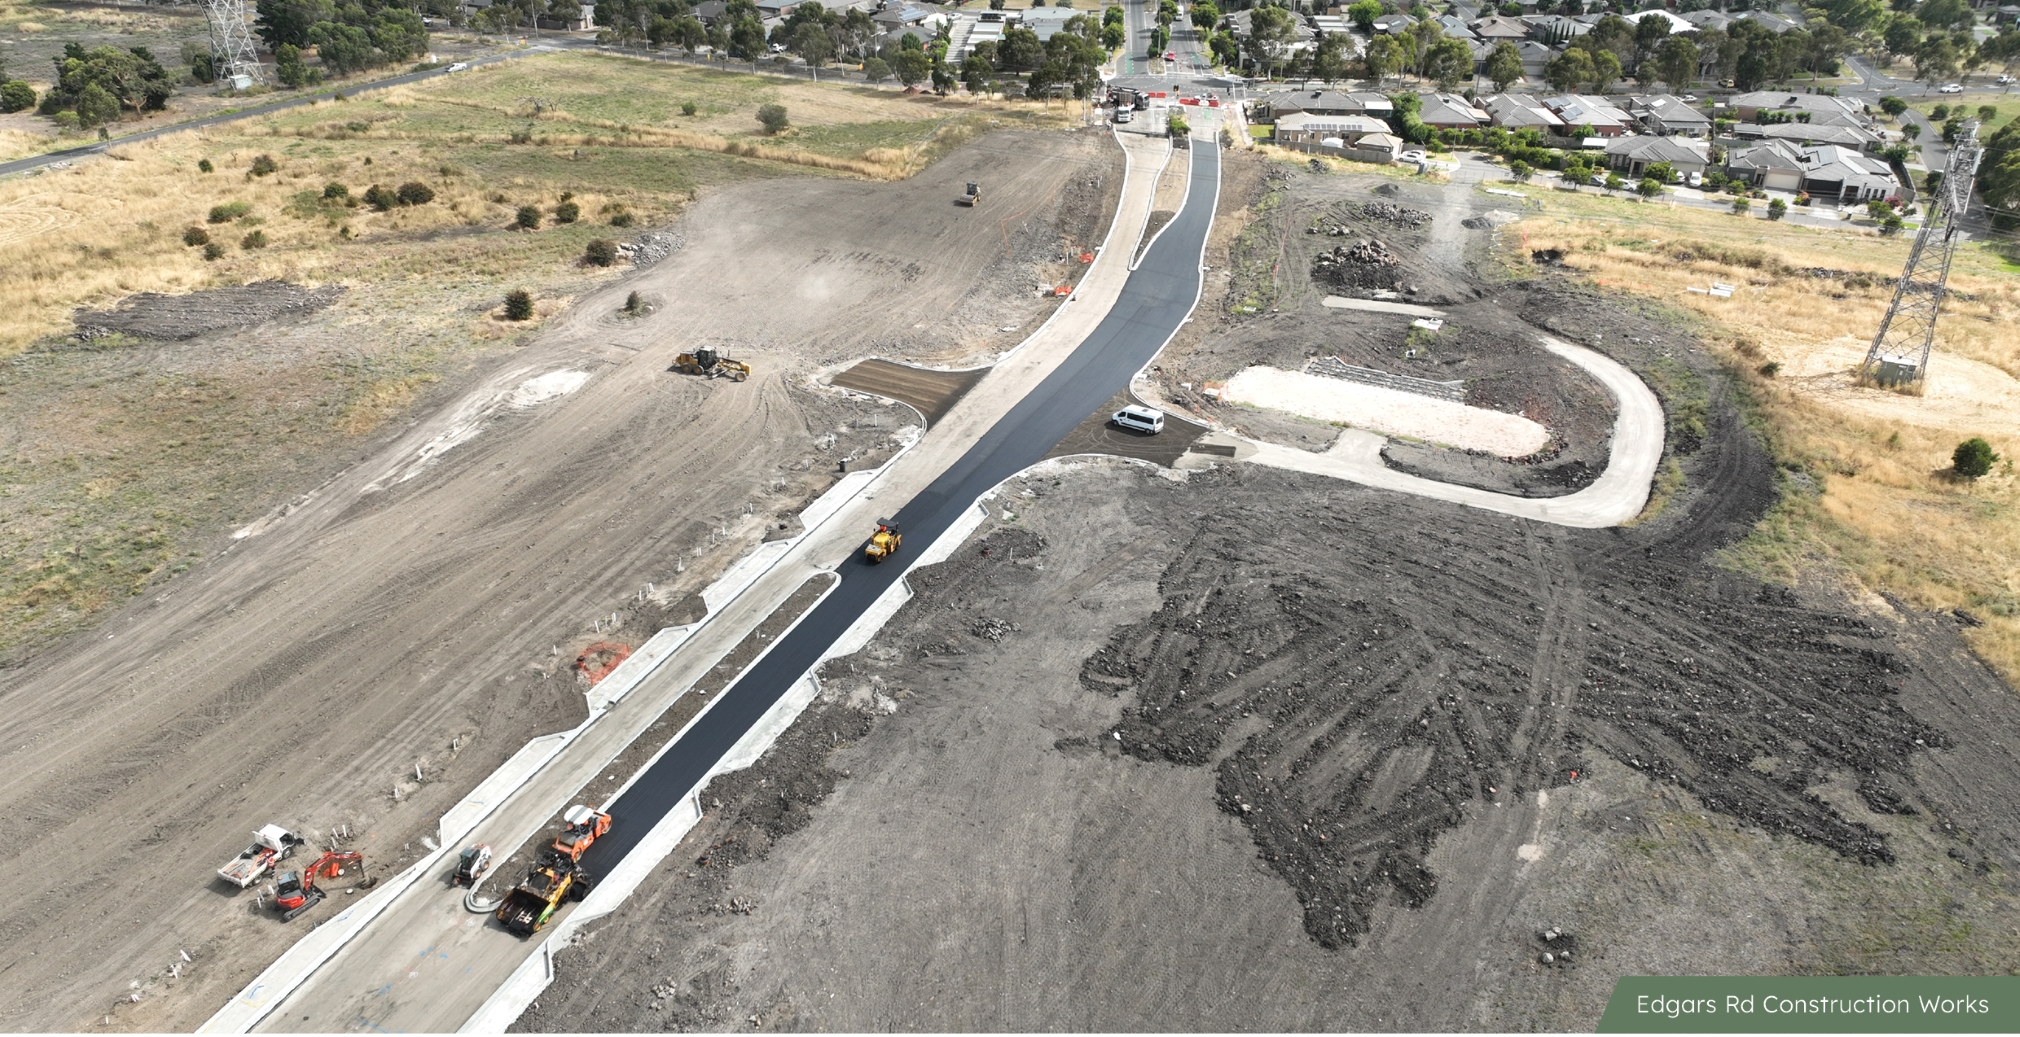 Aerial footage of construction works along a road